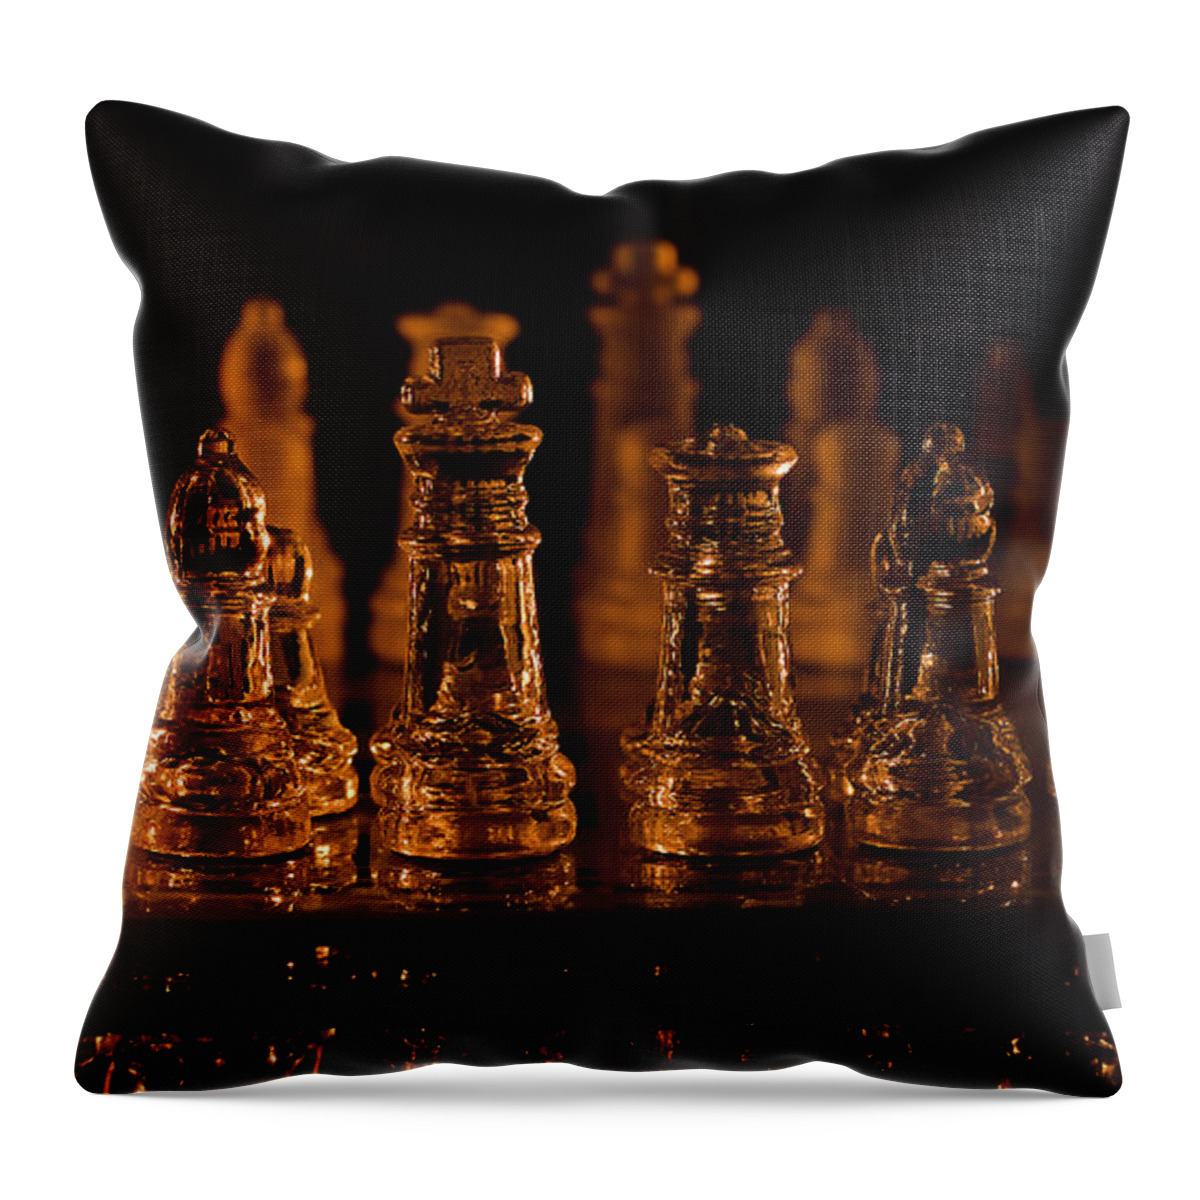  Throw Pillow featuring the photograph Candle Lit Chess Men by Lori Coleman